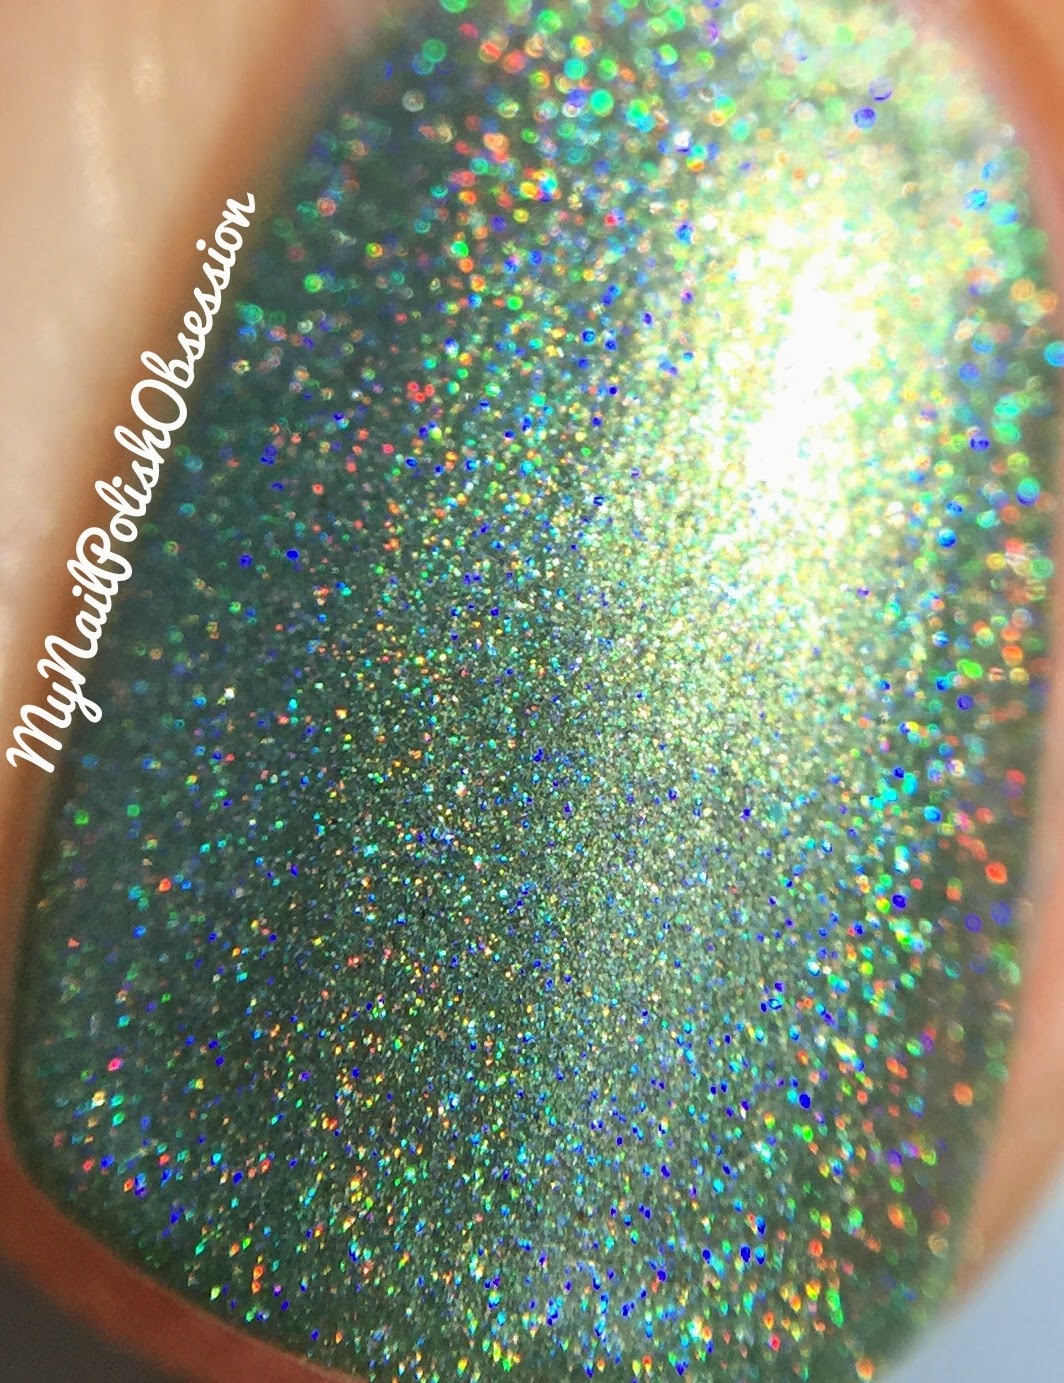 Philly Loves Lacquer Fortunate Rainbow